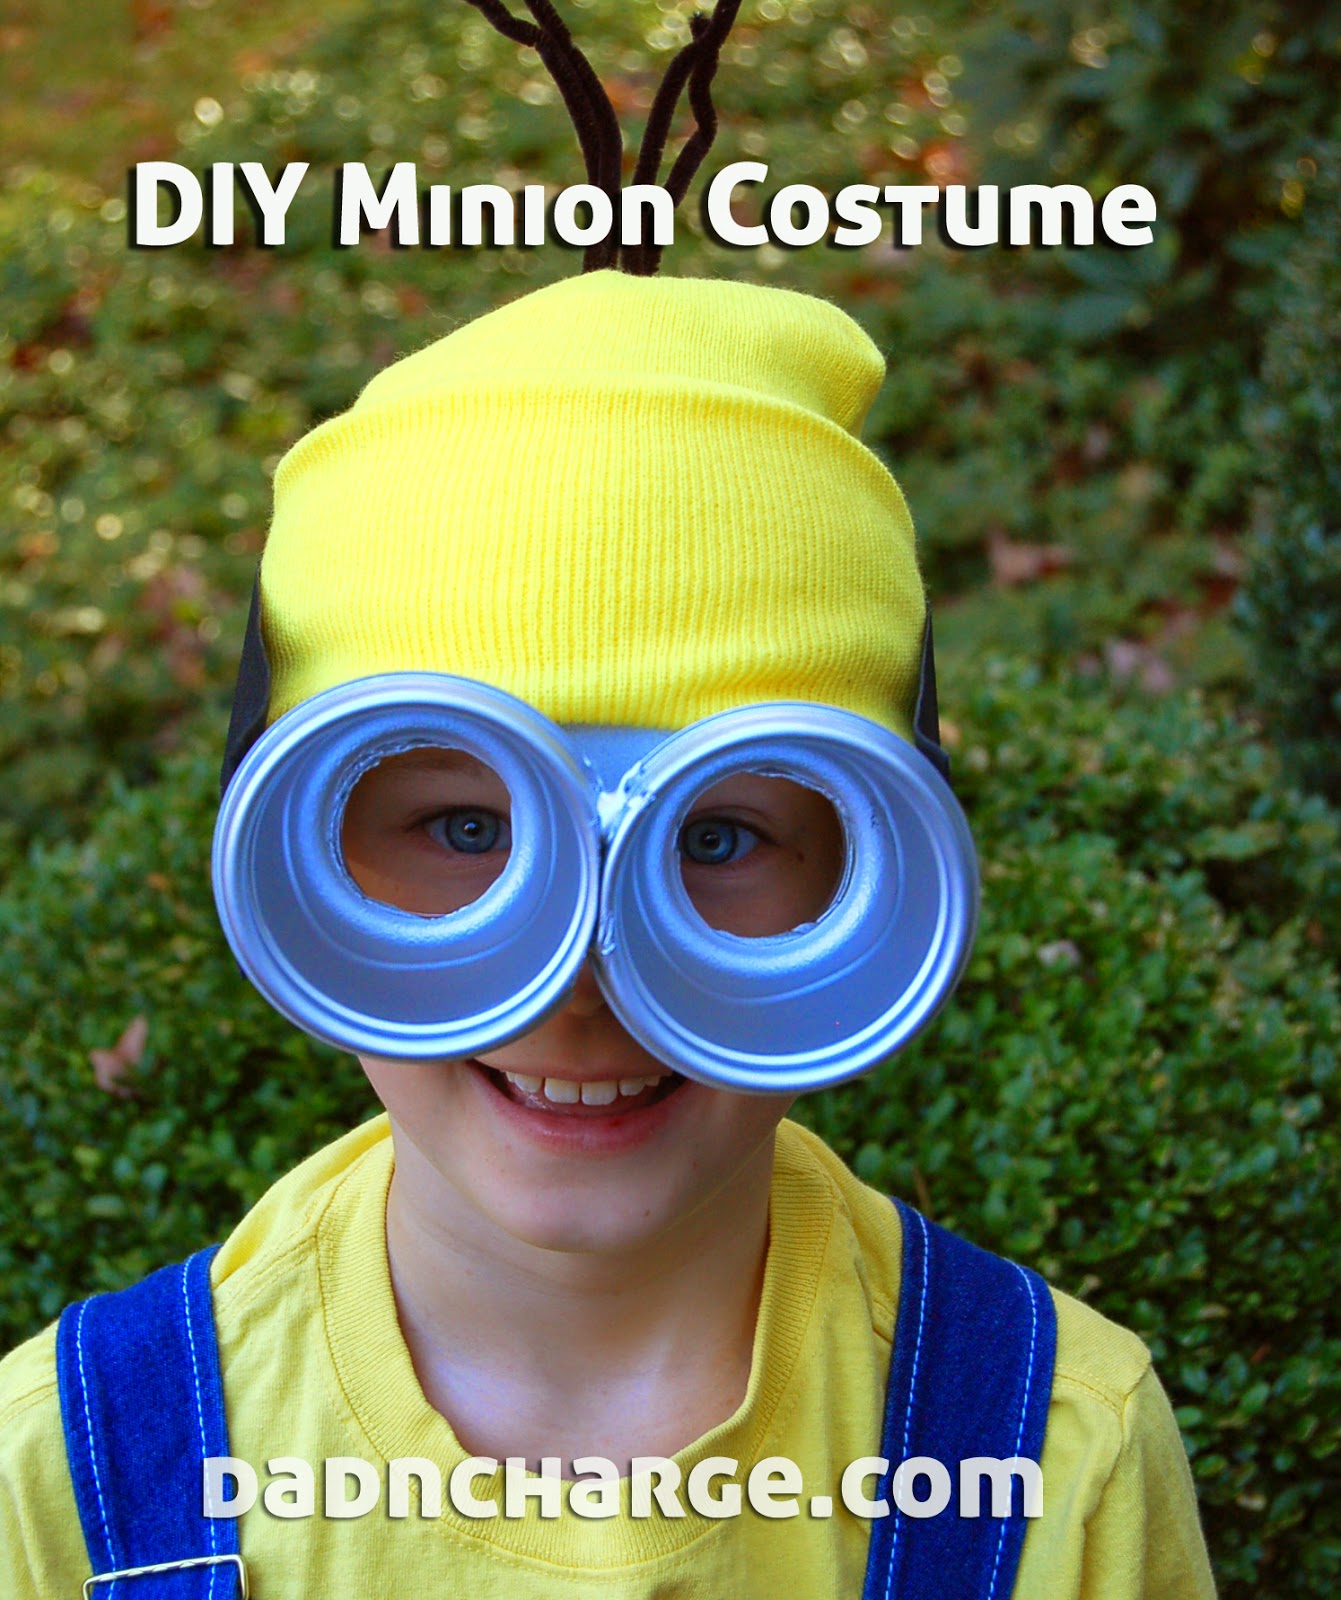  Make  Your Own Despicable Me Minion  Costume for Halloween